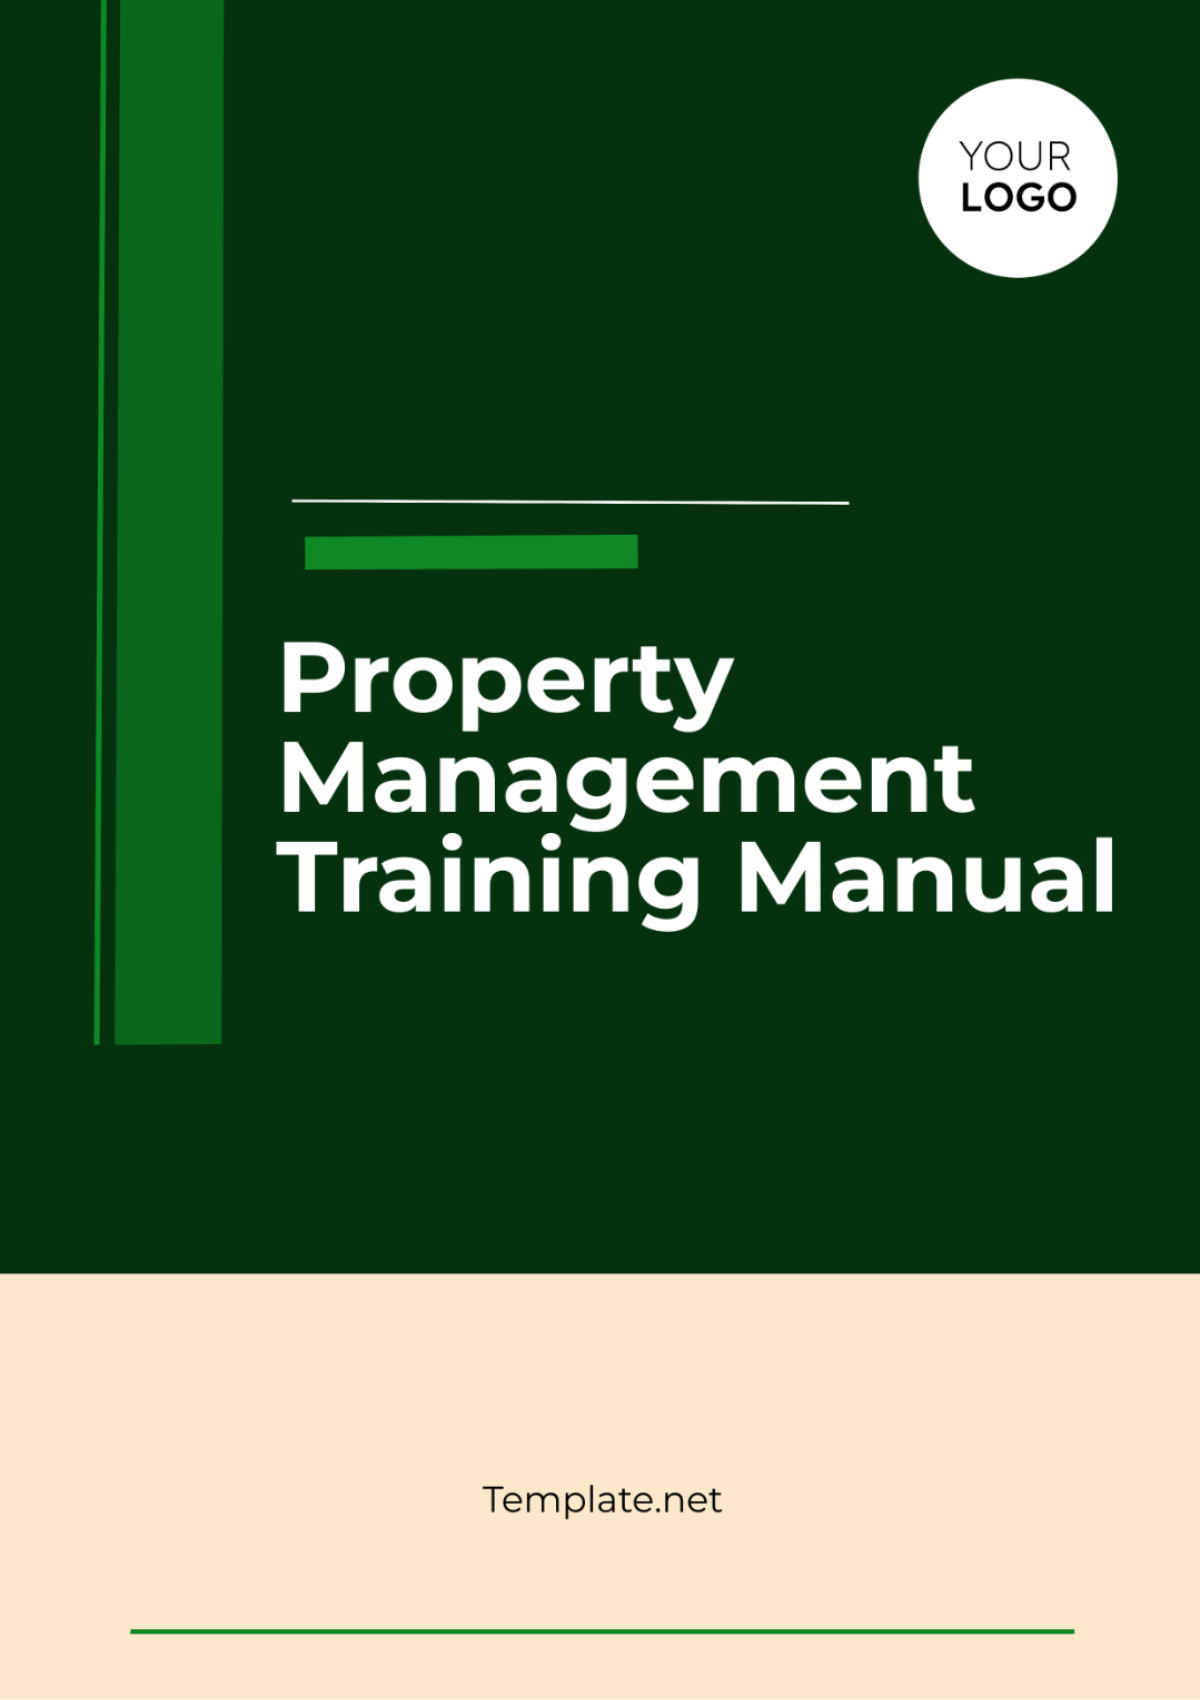 Property Management Training Manual Template